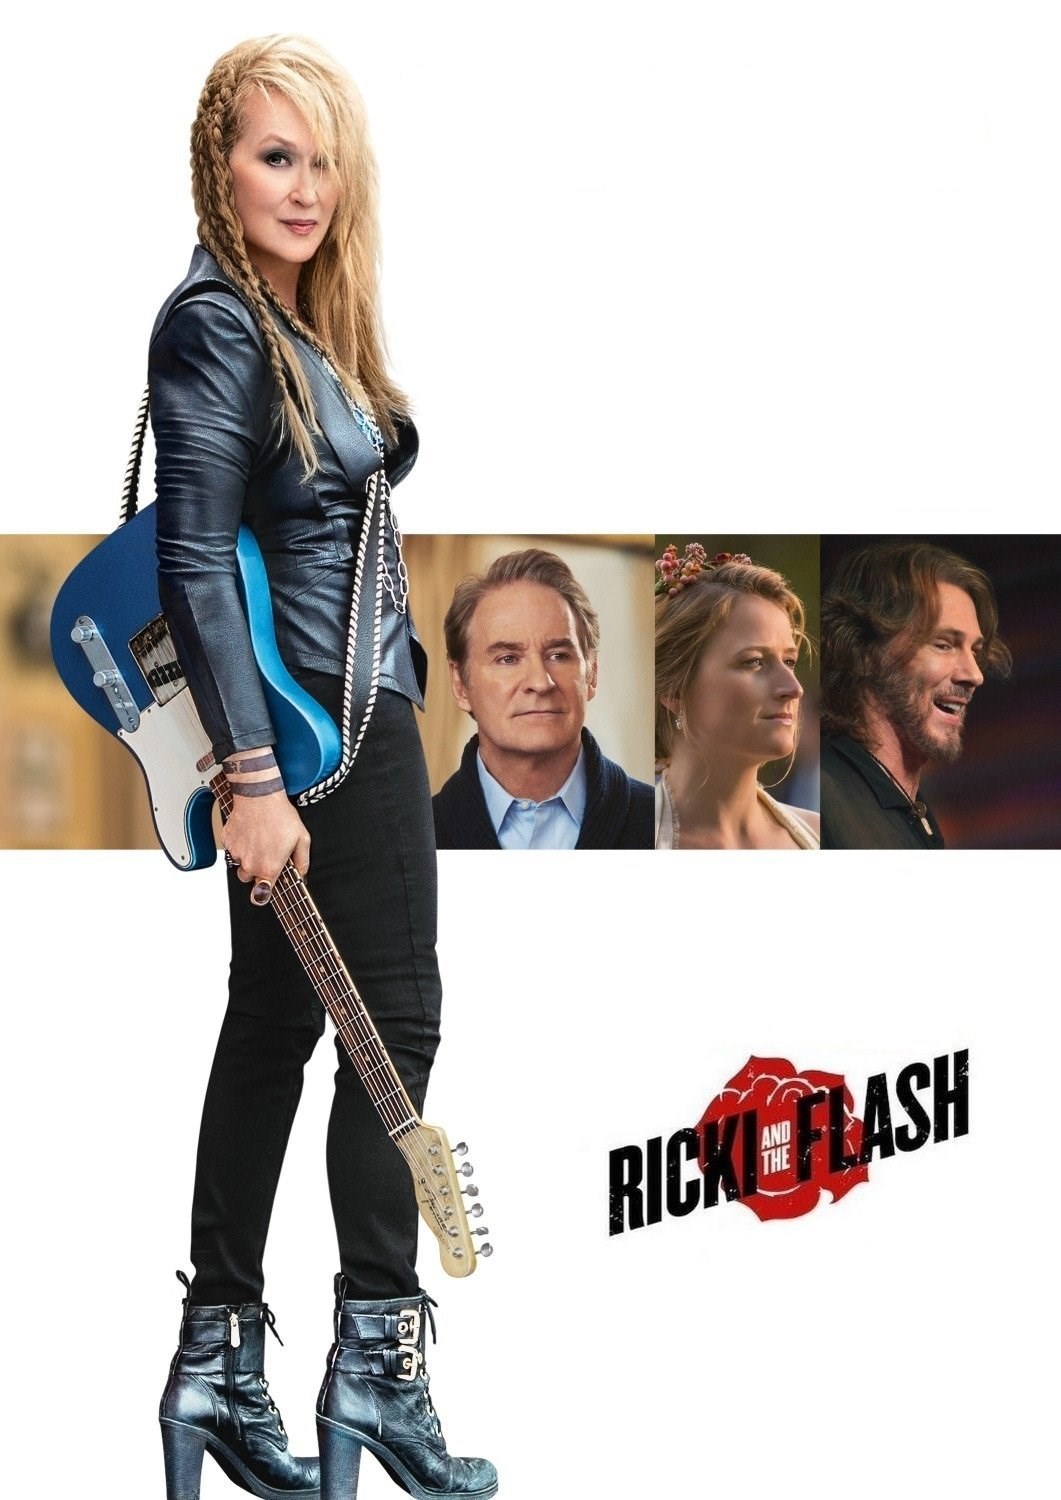 Ricki and the Flash publicity poster Darien Library 6-9-16